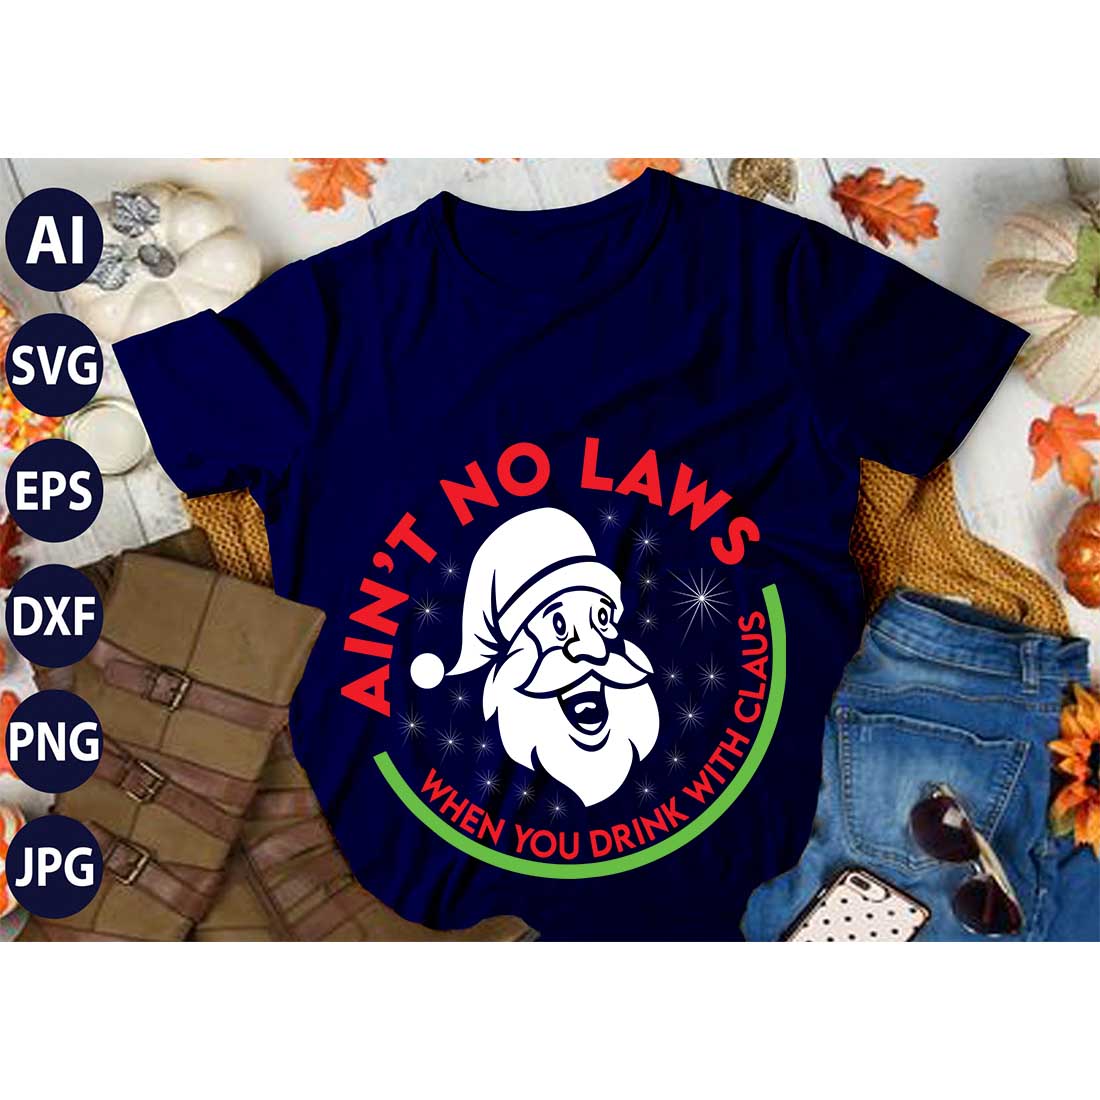 Ain’t No Laws When You’re Santa Clau, SVG T-Shirt Design |Christmas Retro It's All About Jesus Typography Tshirt Design | Ai, Svg, Eps, Dxf, Jpeg, Png, Instant download T-Shirt | 100% print-ready Digital vector file preview image.